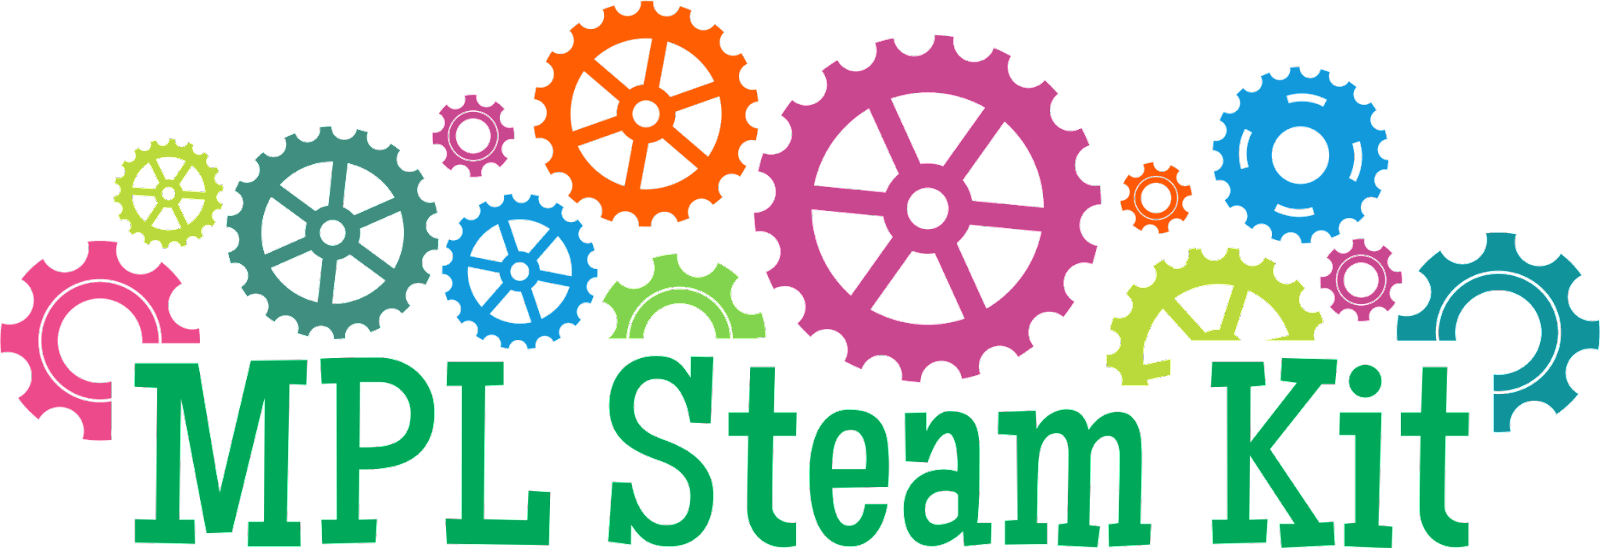 MPL Steam Kit colorful gears graphic